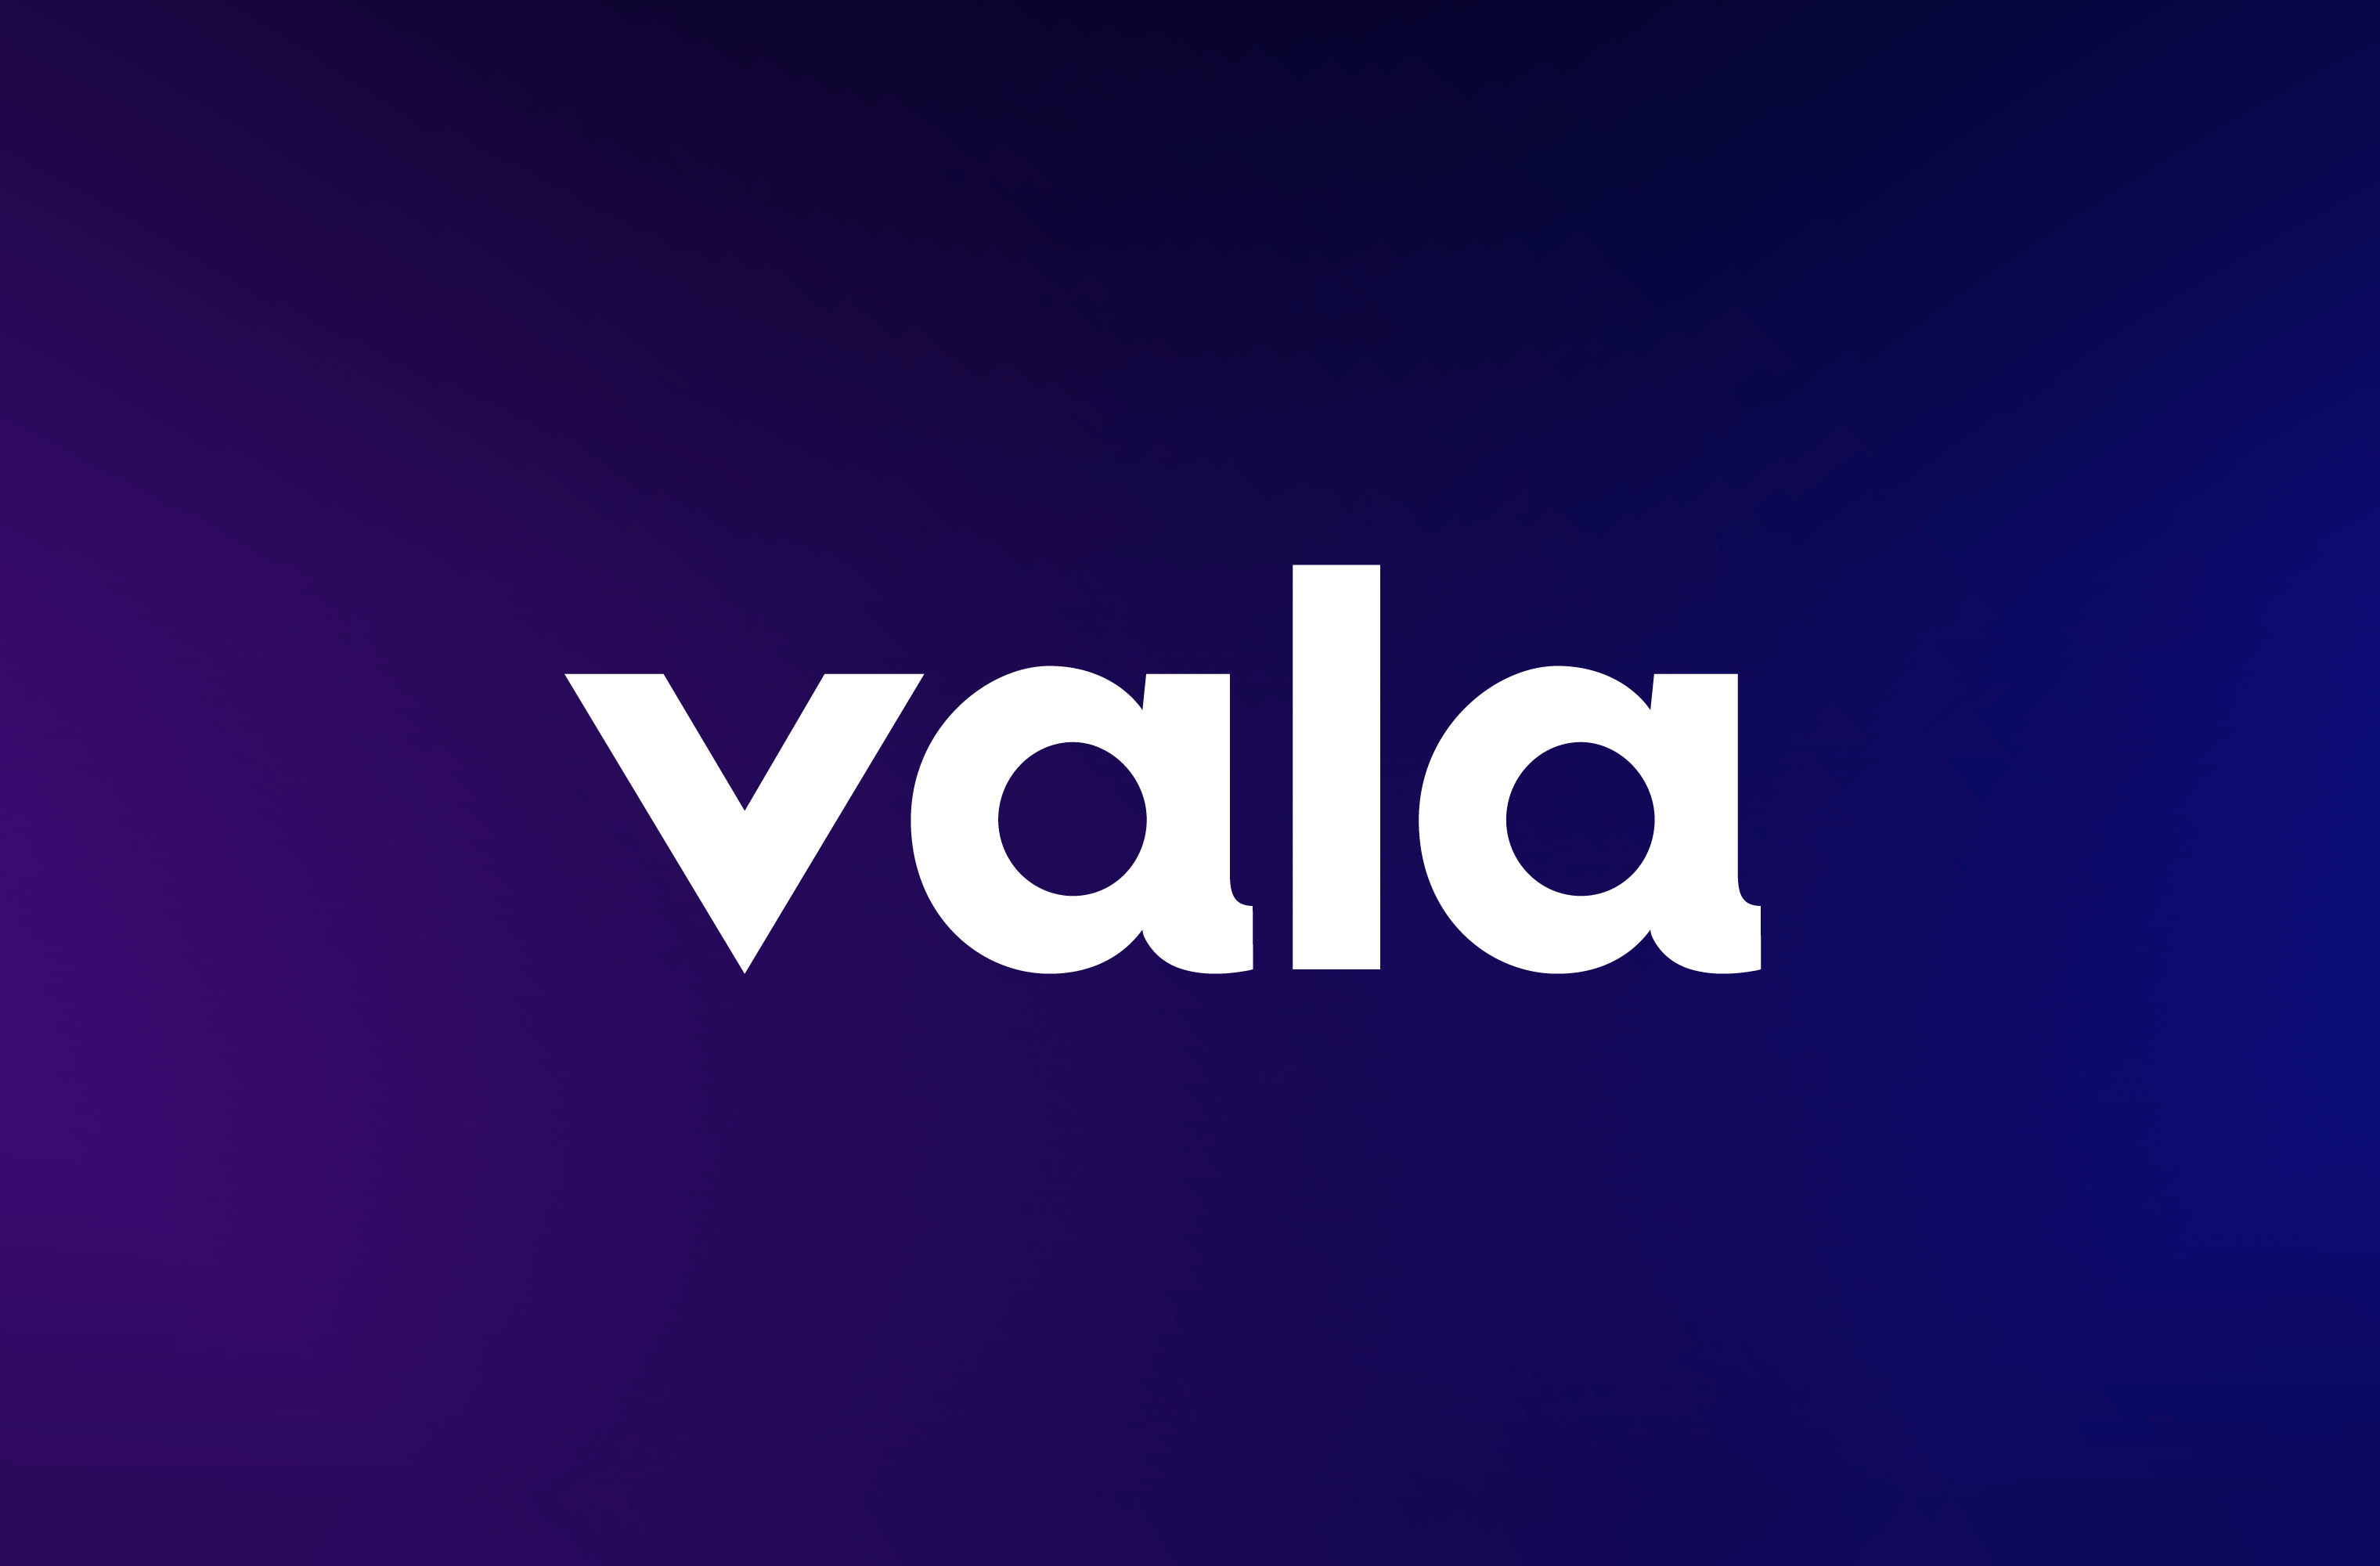 White Vala wordmark on a deep purple and blue gradient background